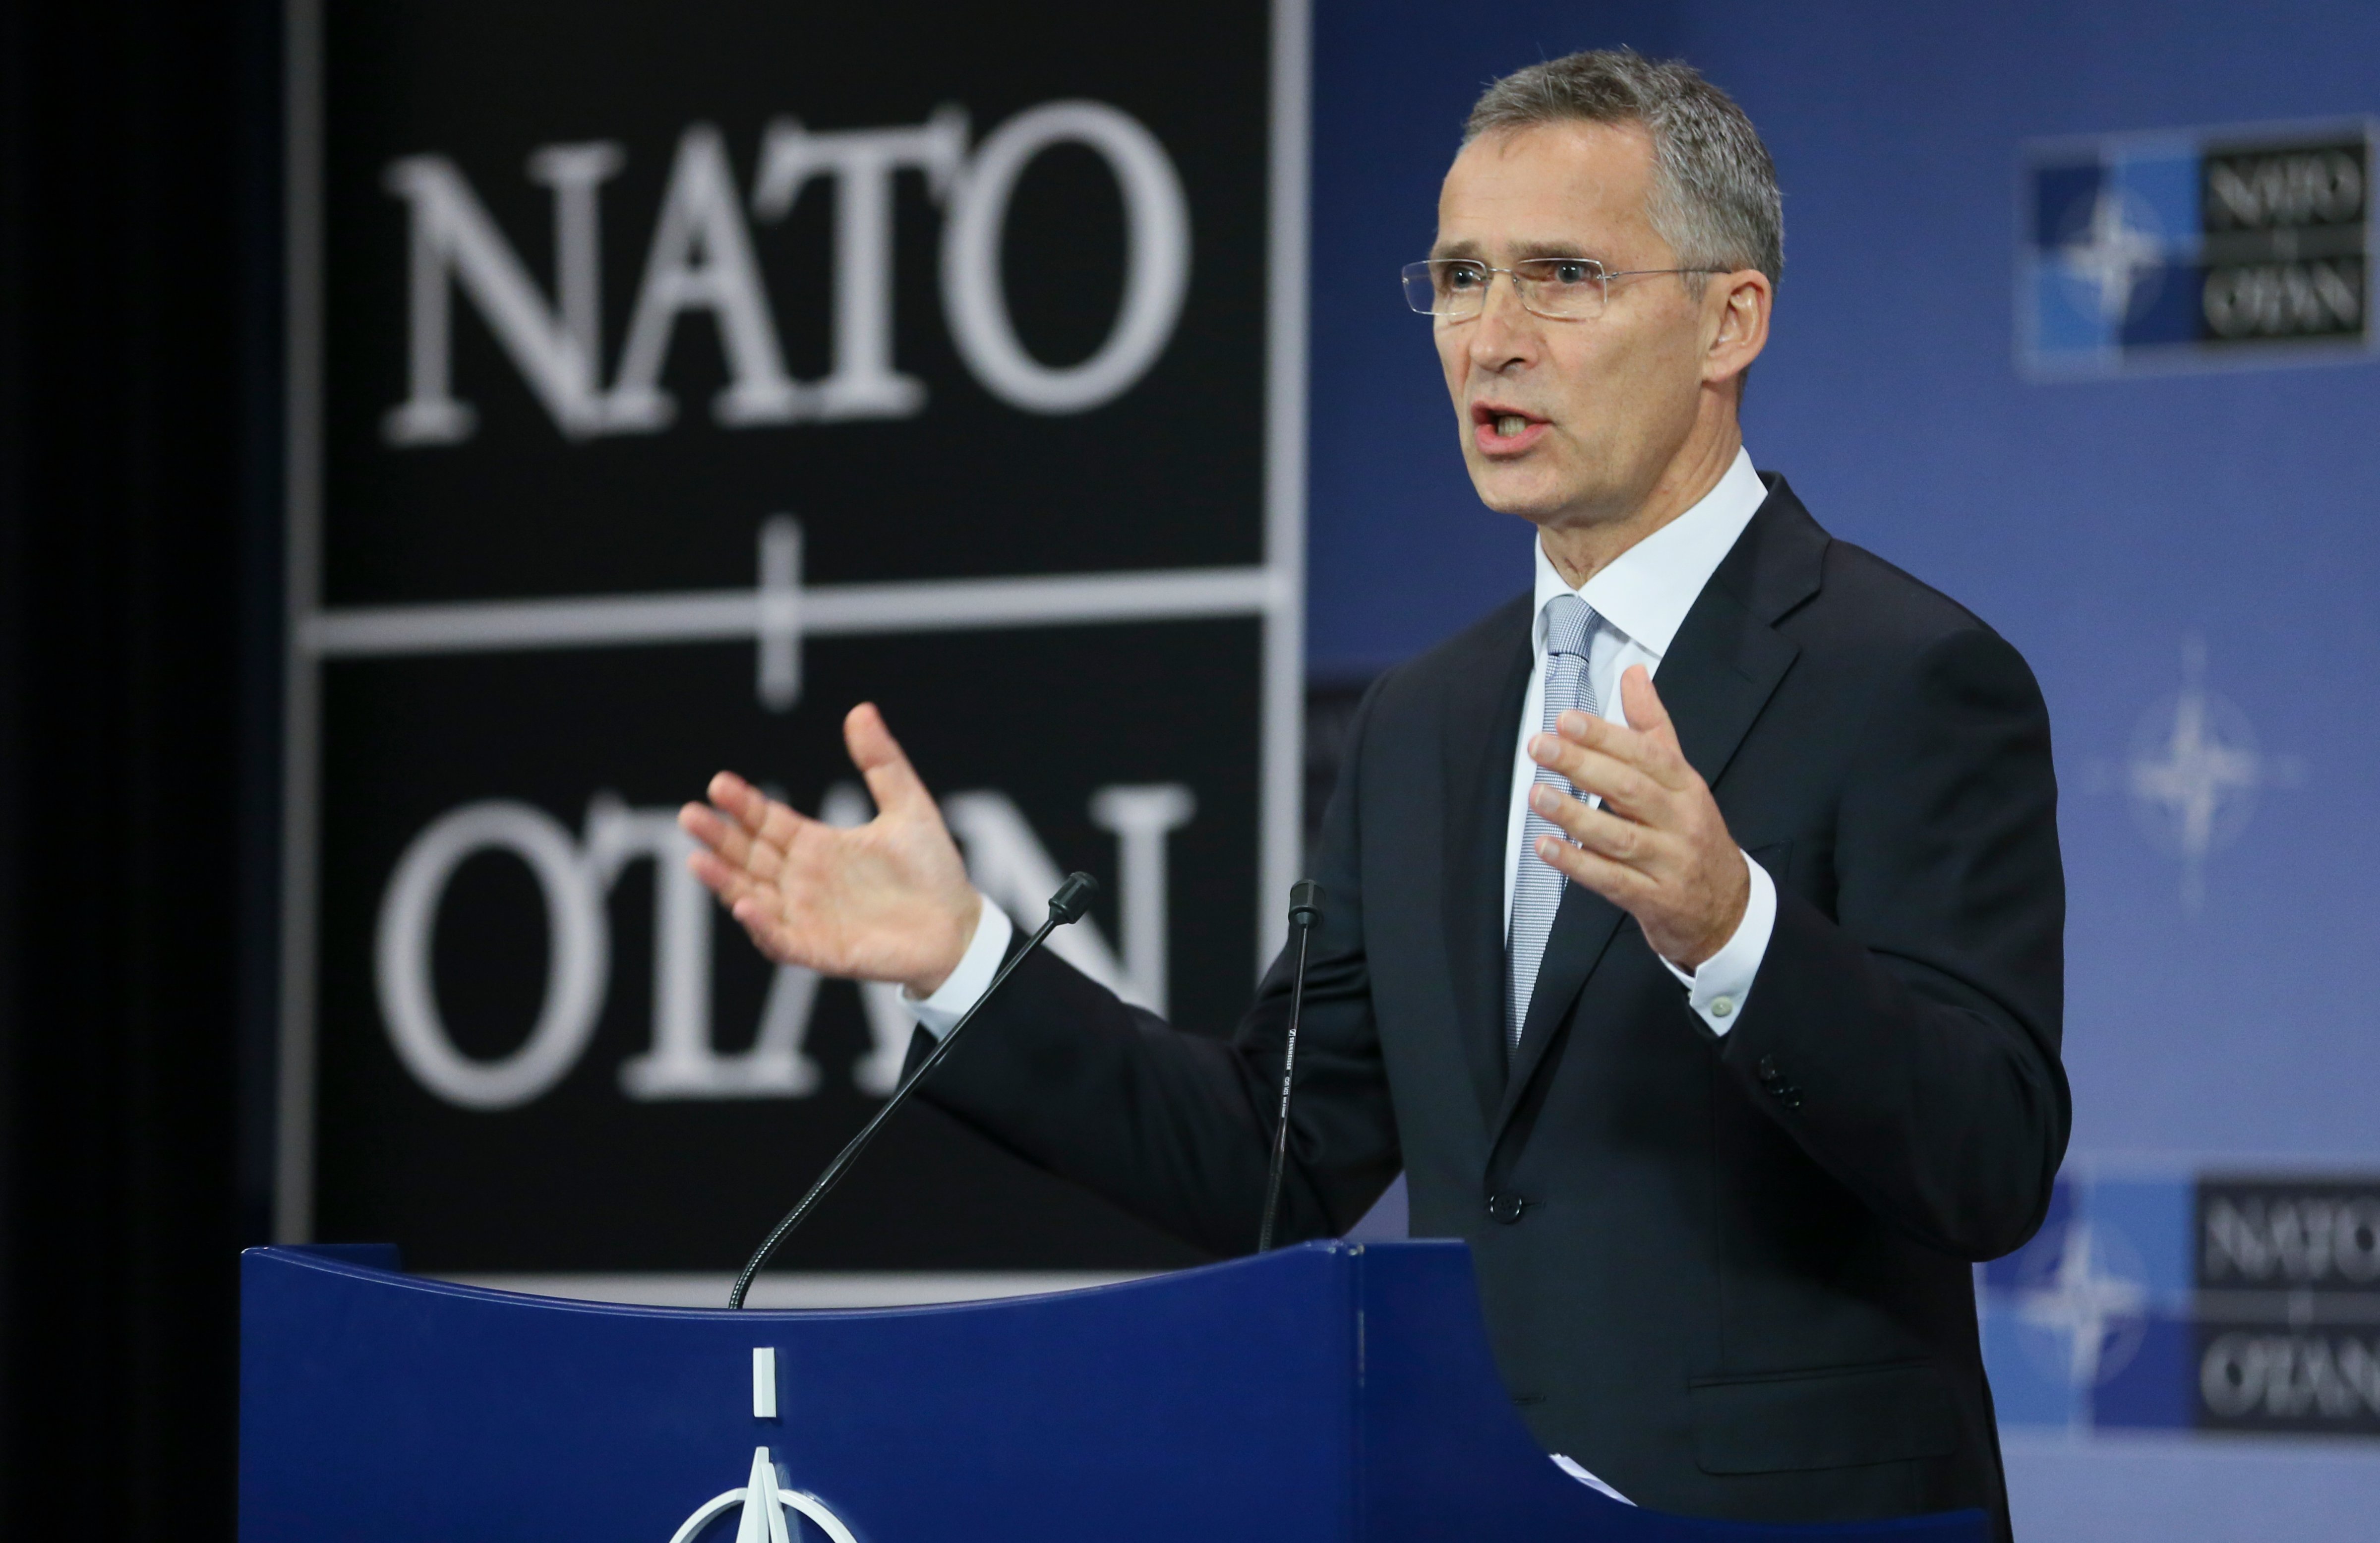 North Atlantic Treaty Organization (NATO) Secretary General Jens Stoltenberg gives a press conference ahead of the Defense Ministers Council at Alliance headquarters in Brussels, Belgium, 25 Oct.2016. (Olivier Hoslet—EPA)